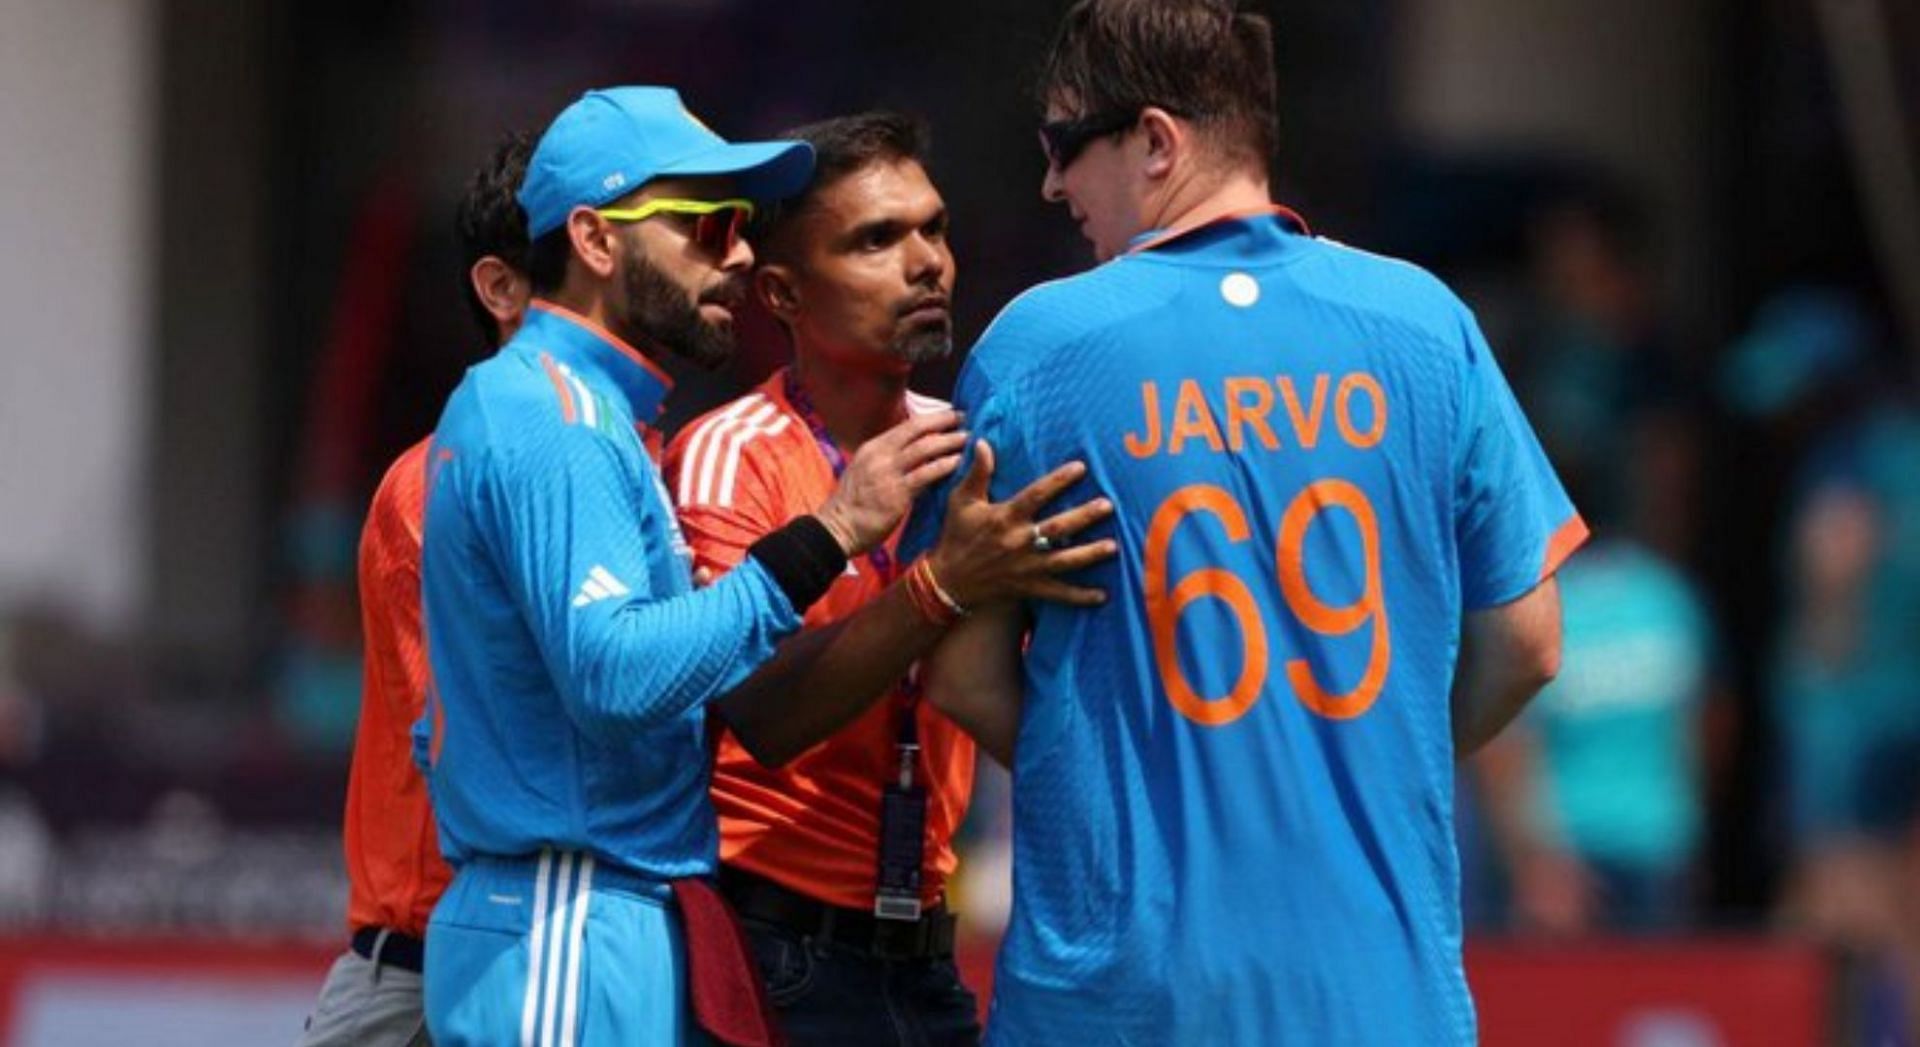 Jarvo 69: Fan with Indian jersey enters playing area at Lord's